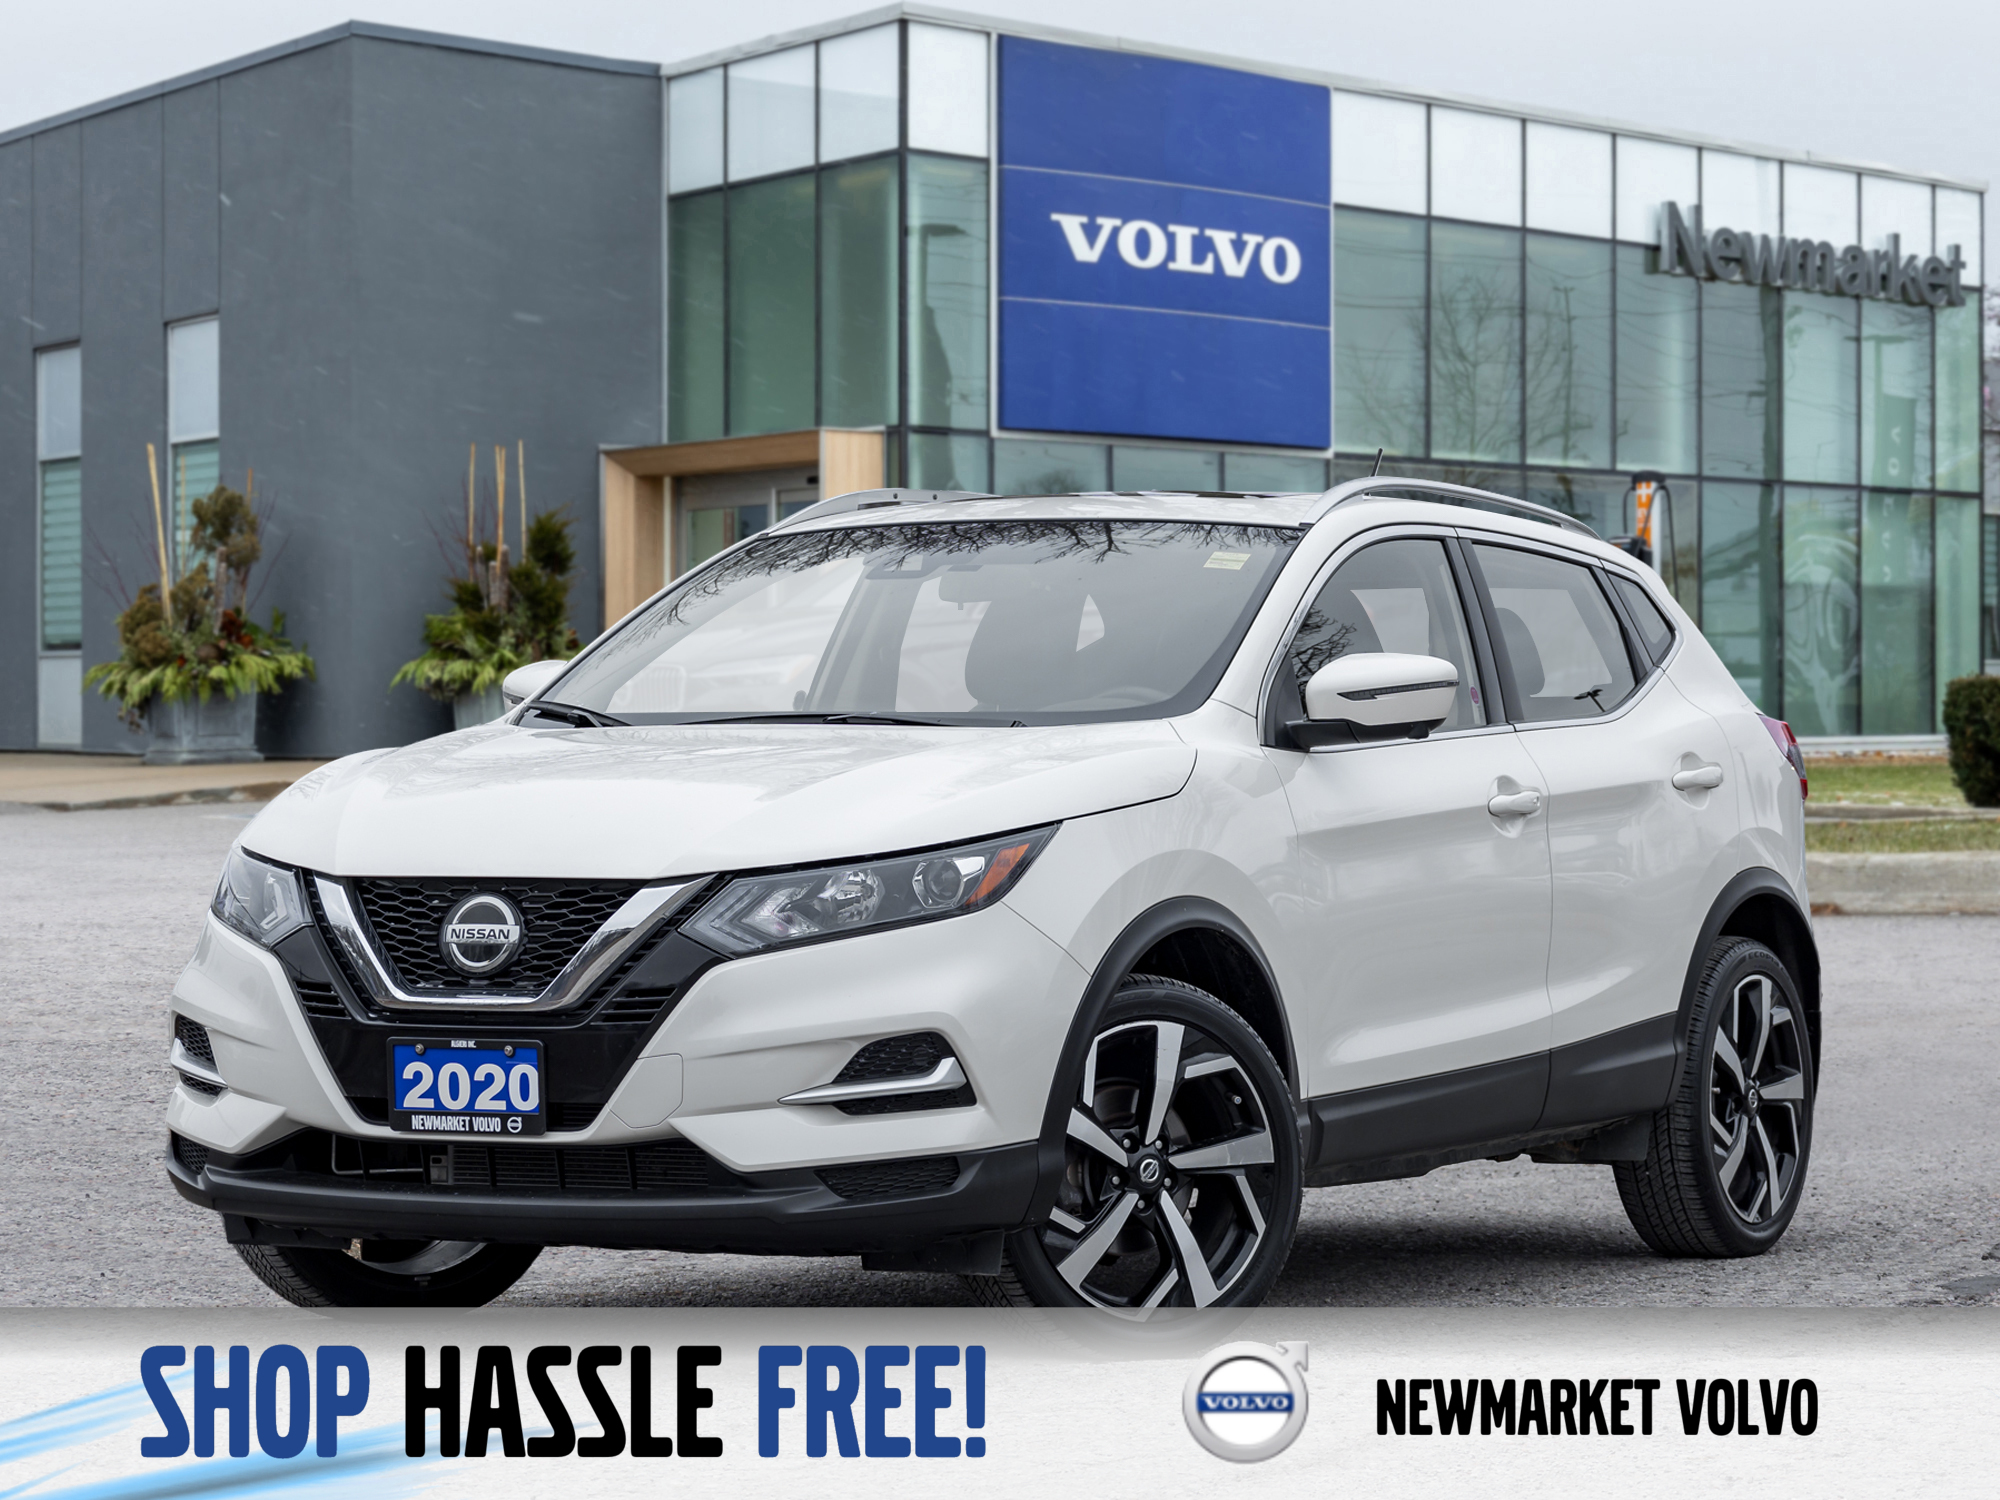 2020 Nissan Qashqai AWD SL CVT |ONE OWNER |LOW KM |SAFETY CERTIFIED